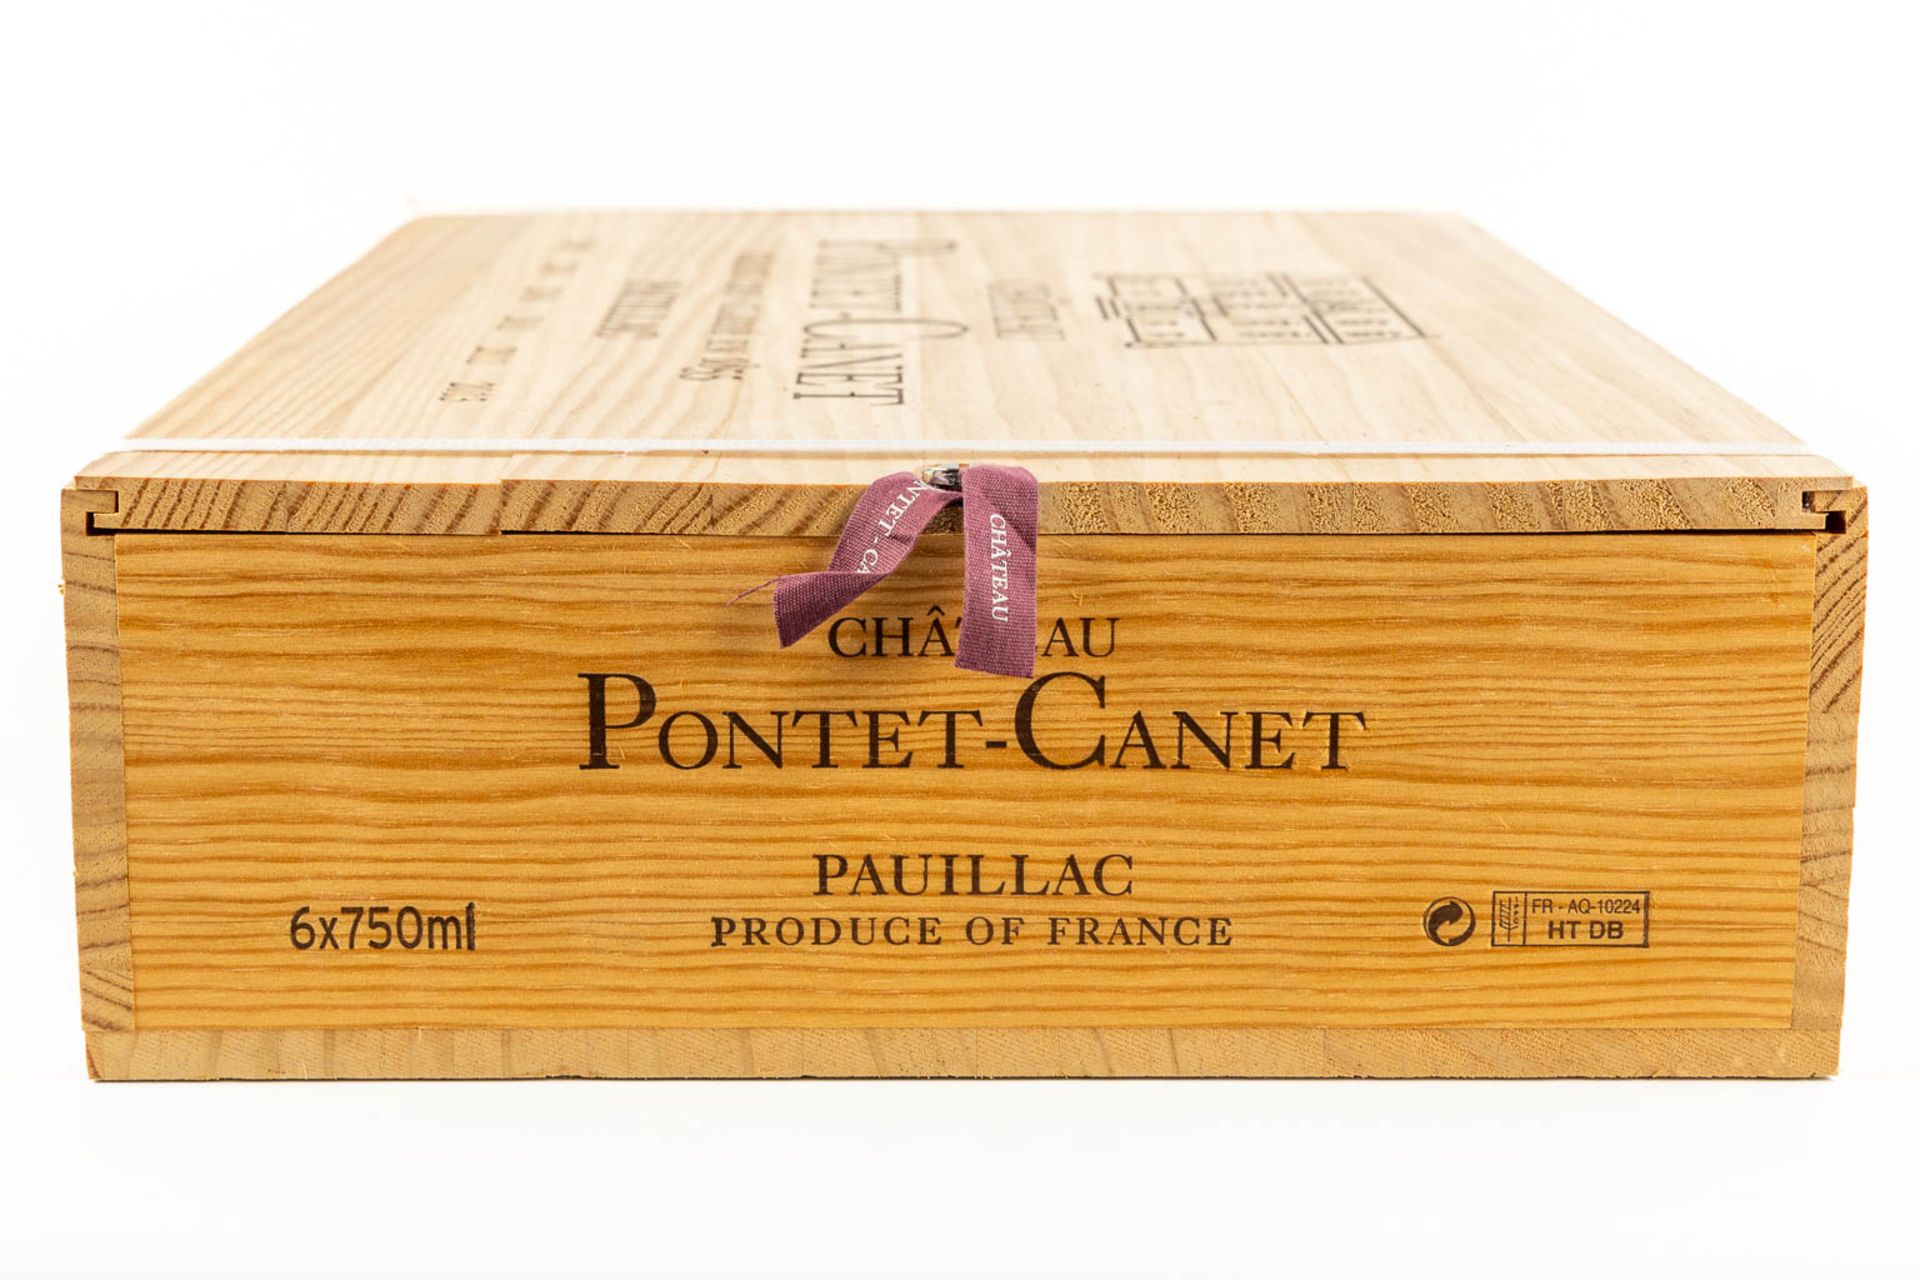 2008-2013 Pontet Canet Collection Case (owc) - Image 4 of 4